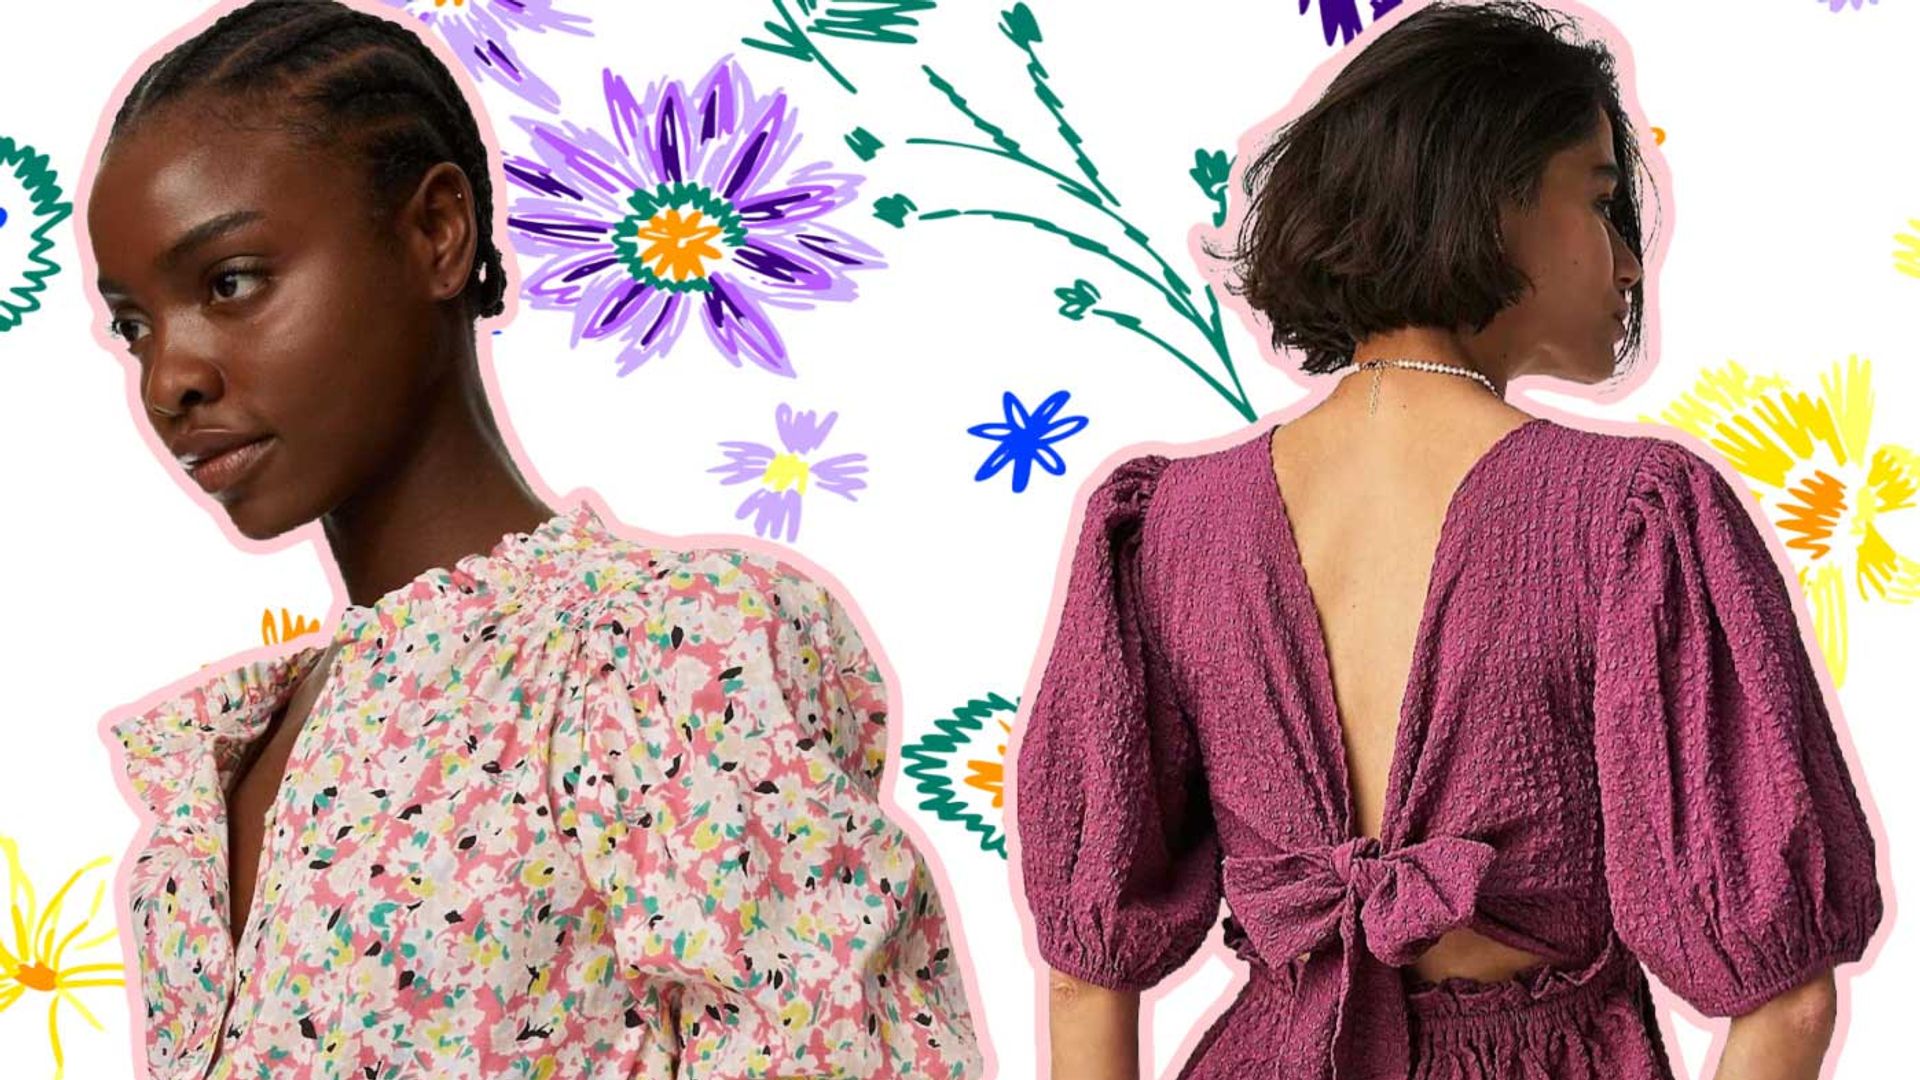 11 pretty tops for women this spring: Florals, pastels, crochet & more cute  styles